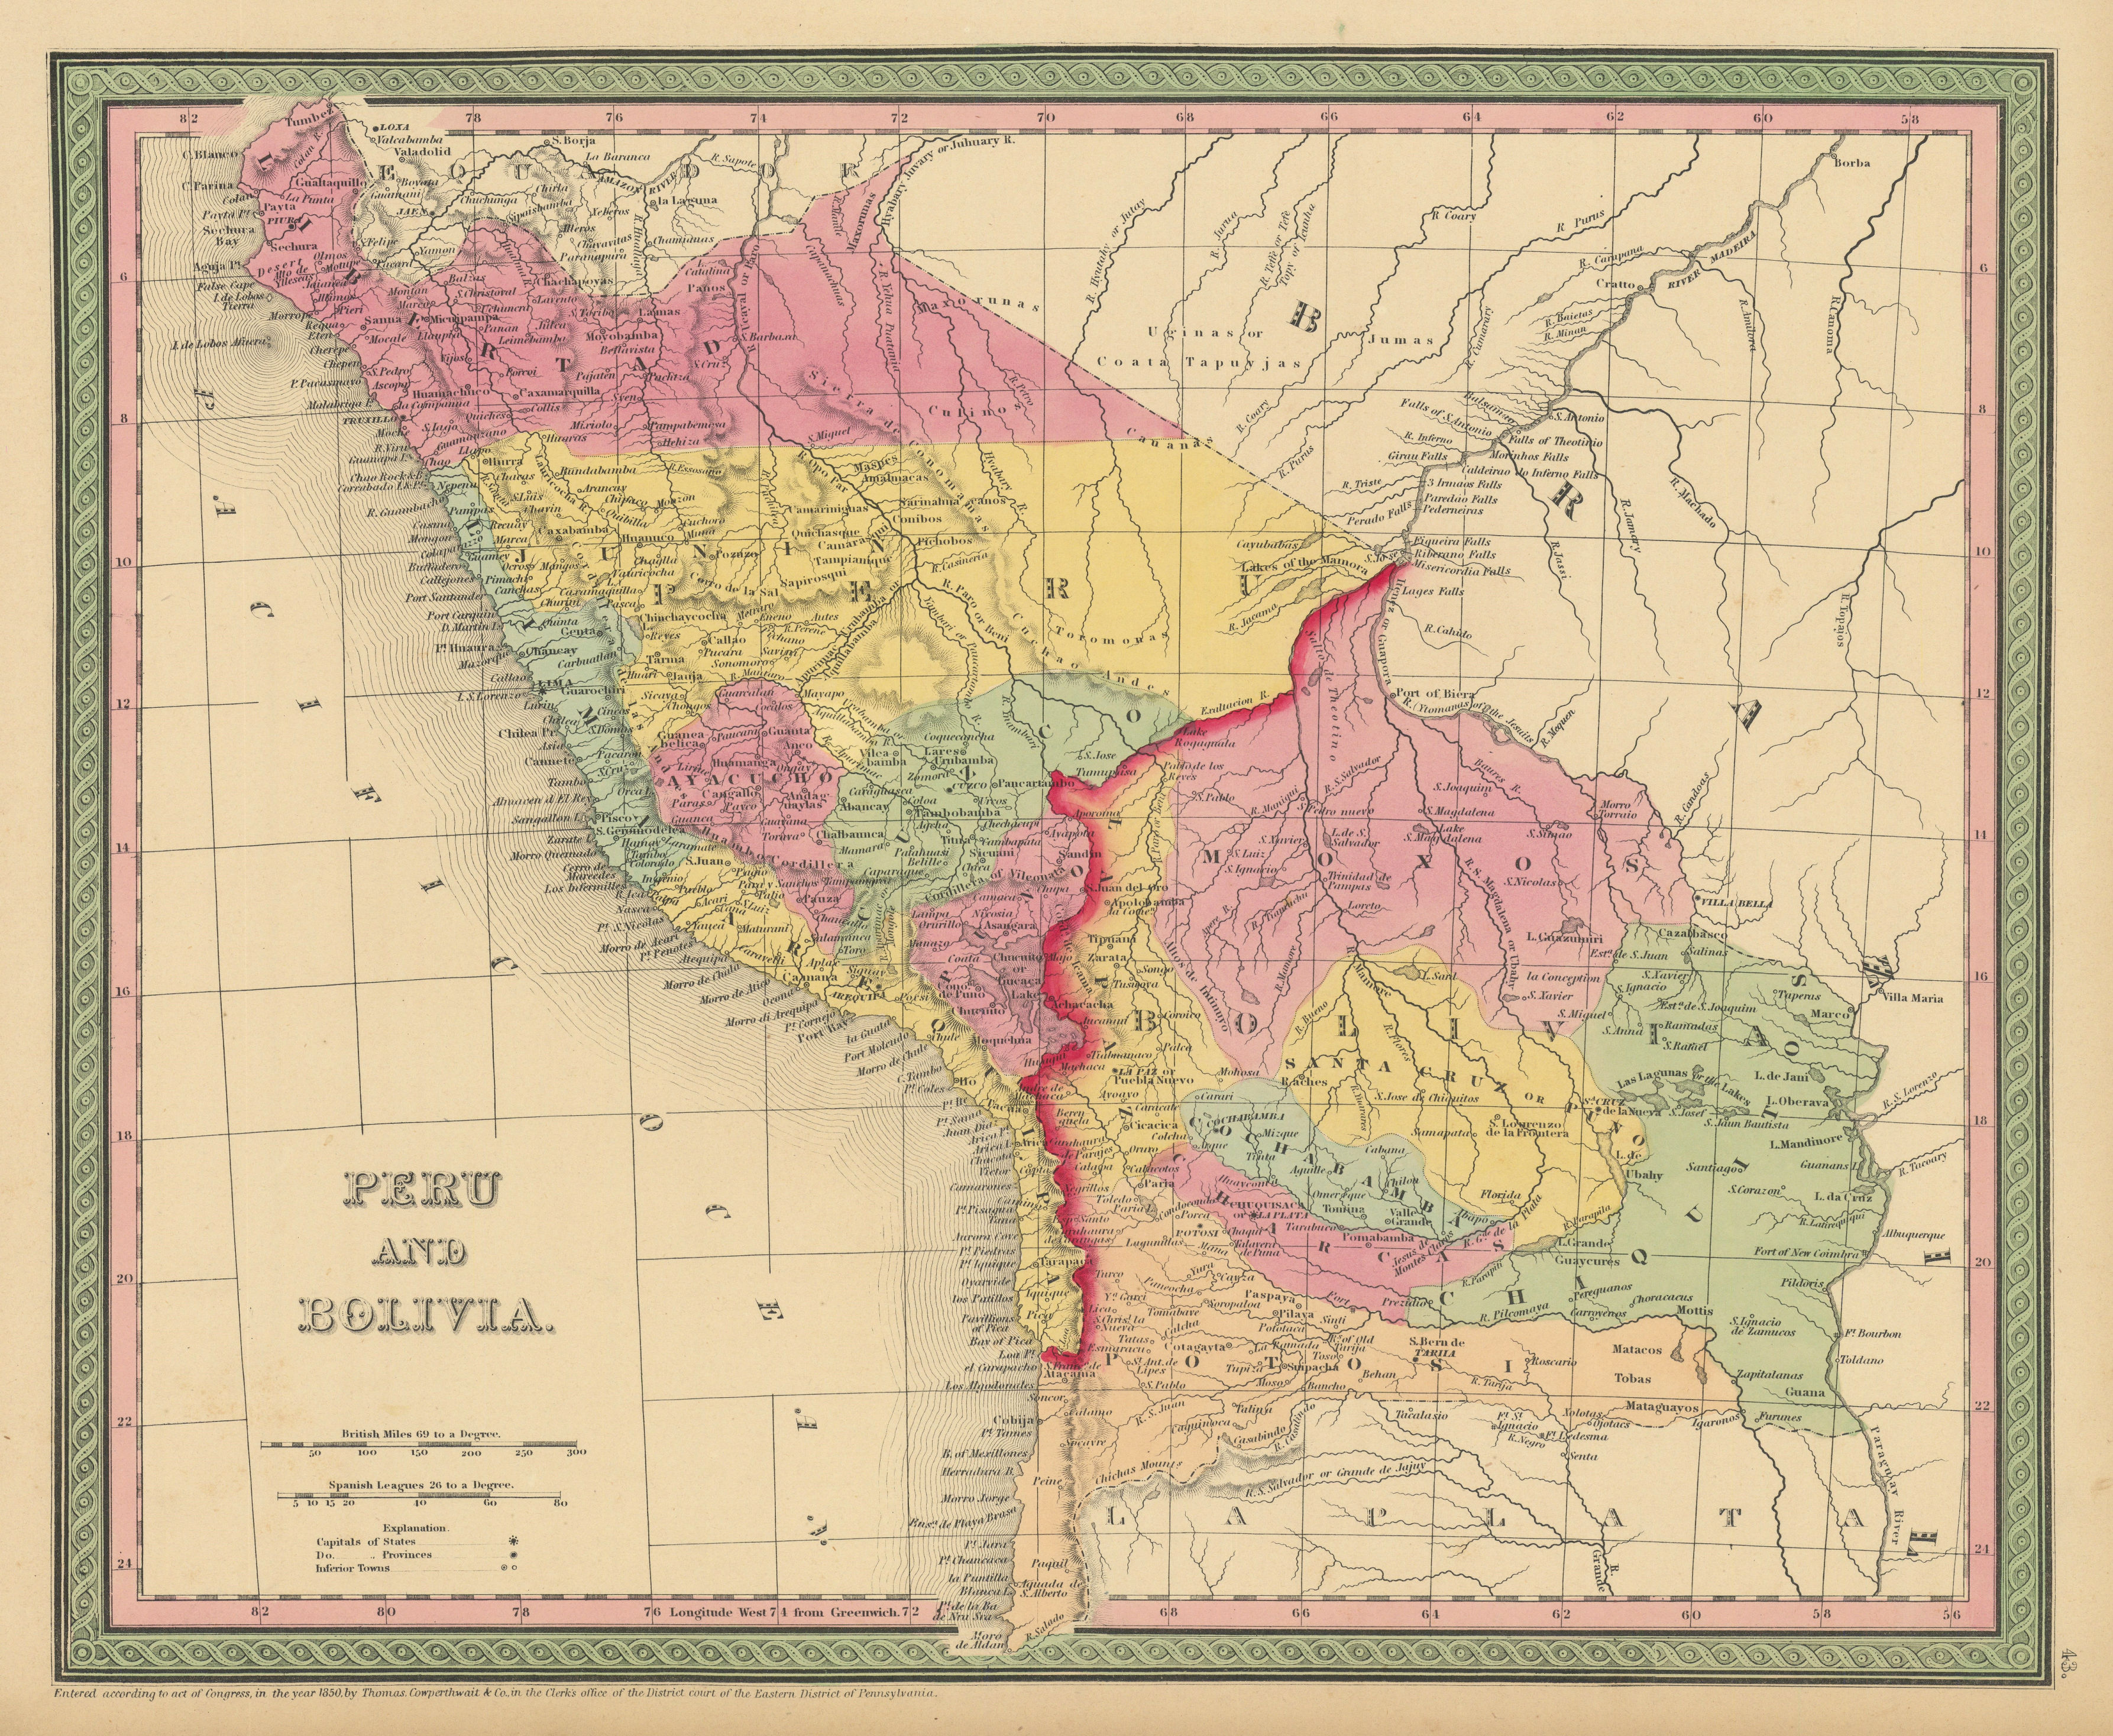 Associate Product Peru and Bolivia, including Litoral. THOMAS, COWPERTHWAIT 1852 old antique map